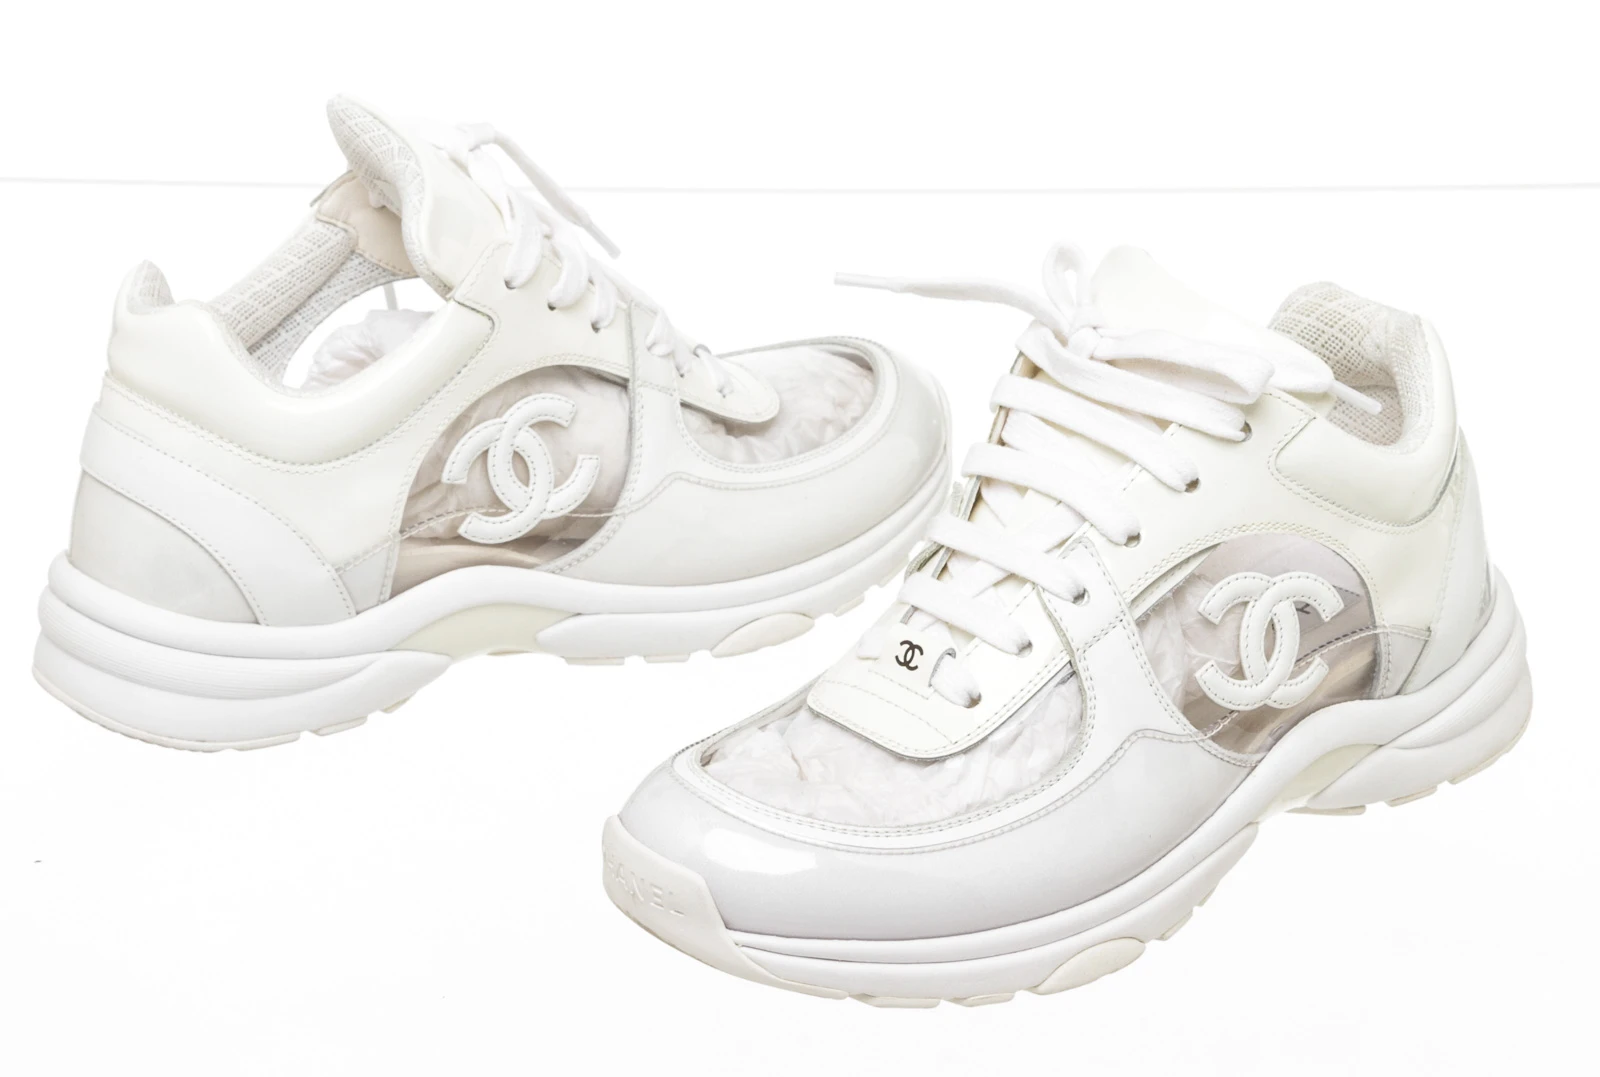 chanel sneakers white transparent